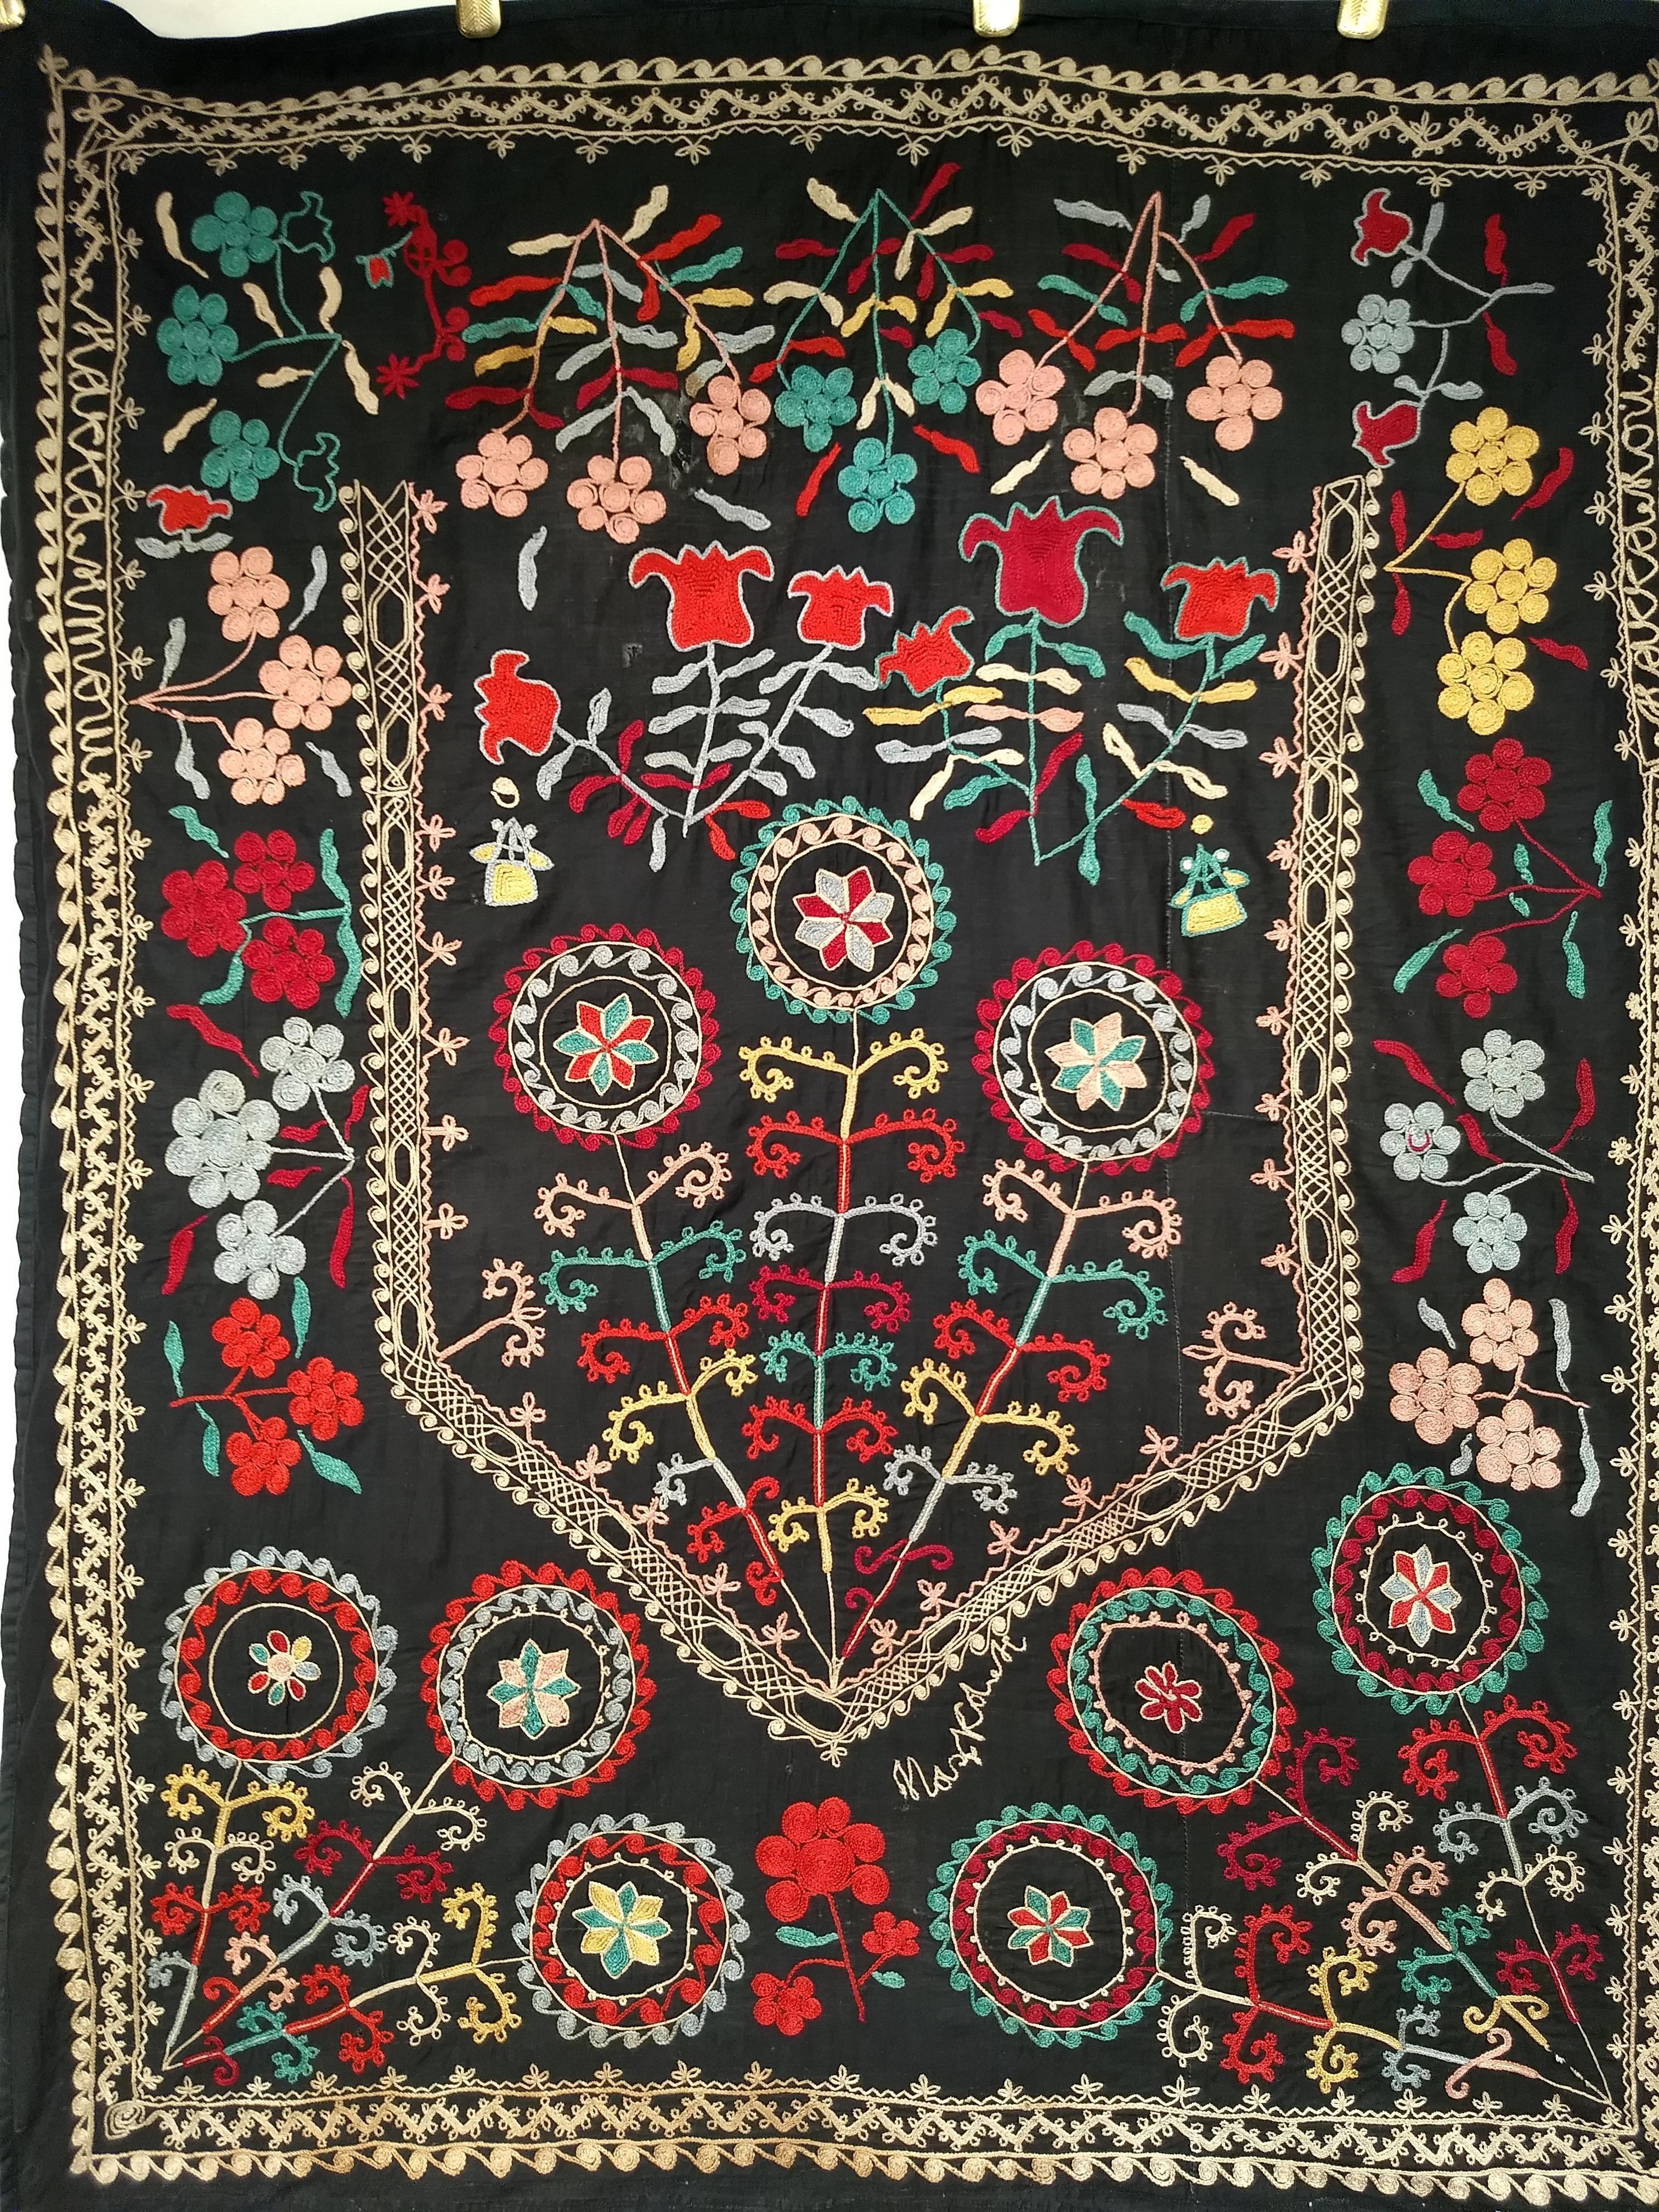 Mid-20th Century Vintage Hand Embroidered Uzbek Silk Suzani in Black, Red, Green, Yellow Wall Art For Sale